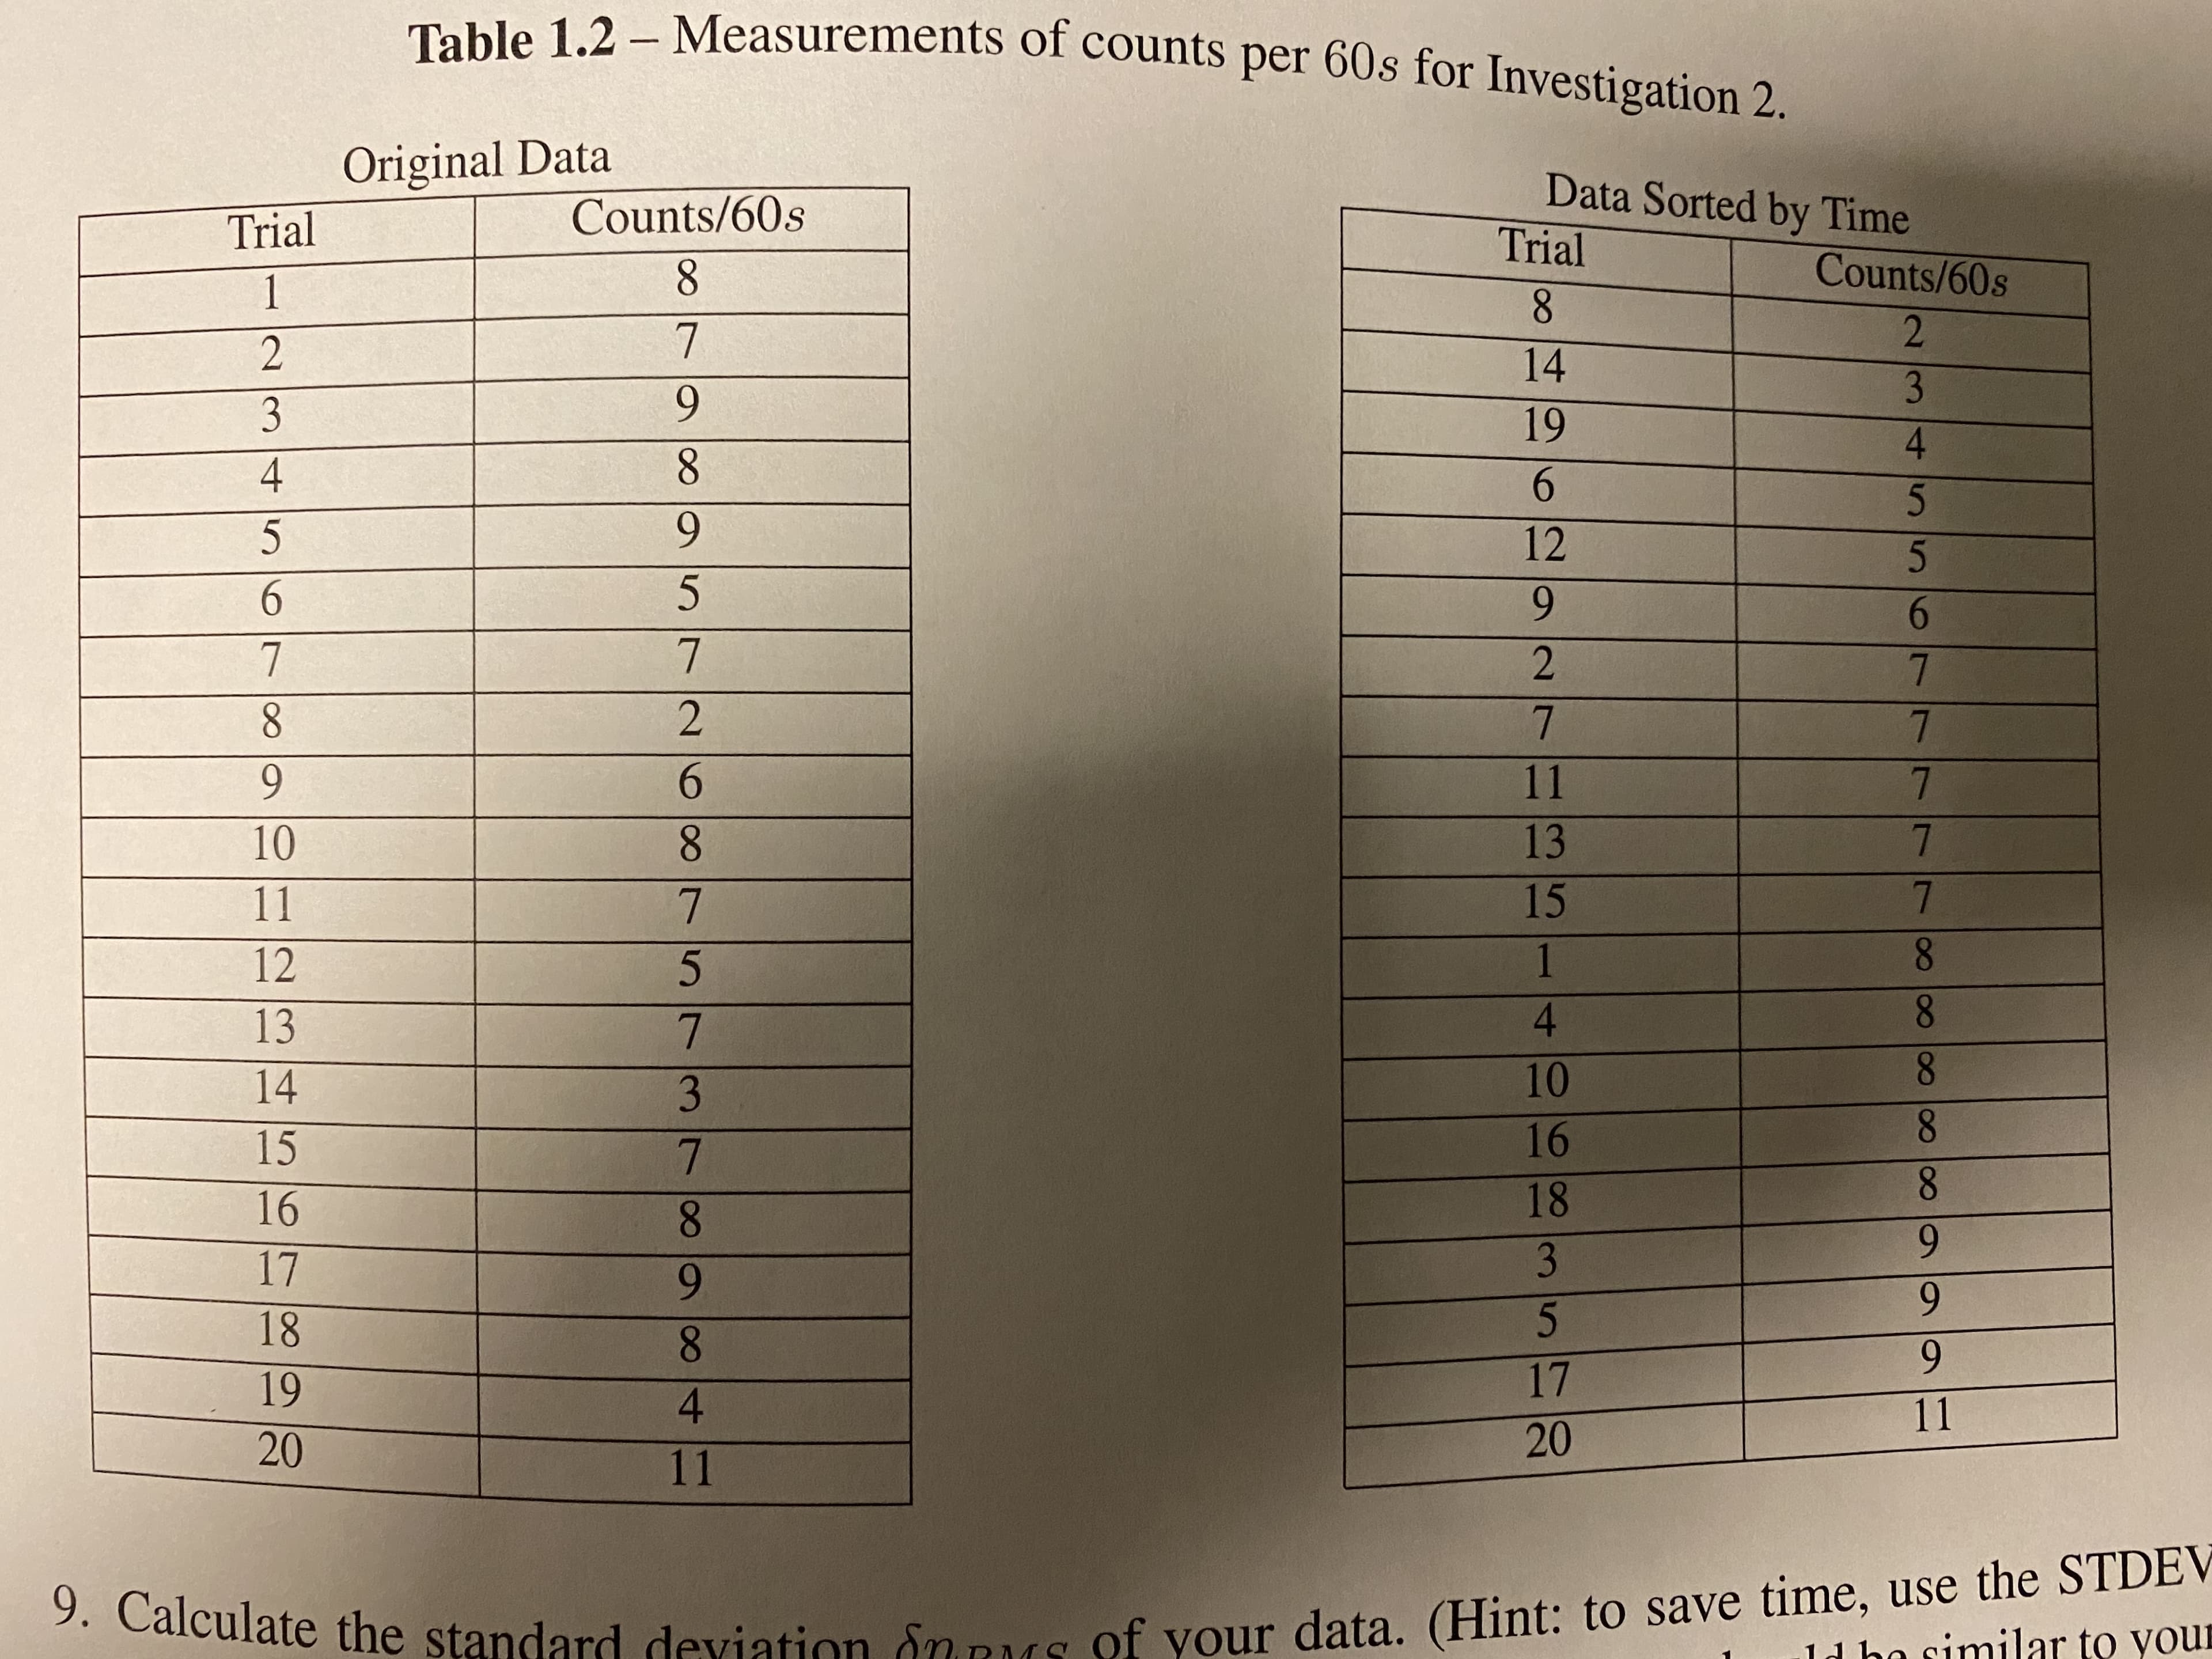 Table 1.2 - Measurements of counts per 60s for Investigation 2.
Original Data
Data Sorted by Time
Counts/60s
Trial
Trial
Counts/60s
8
1
8.
7
14
9.
3
19
4.
4
6.
9.
12
6.
6.
5.
8.
7.
6.
9.
11
7.
7.
13
8.
10
15
11
8.
1
12
80
4.
13
8.
10
14
3
8.
16
15
7.
8.
18
16
8.
6.
3
17
9.
9.
18
8.
6.
17
19
4.
11
20
20
11
9. Calculate the standard deviation Snus of your data. (Hint: to save time, use the STDEV
imilar to yoUE
ld bo s
75
